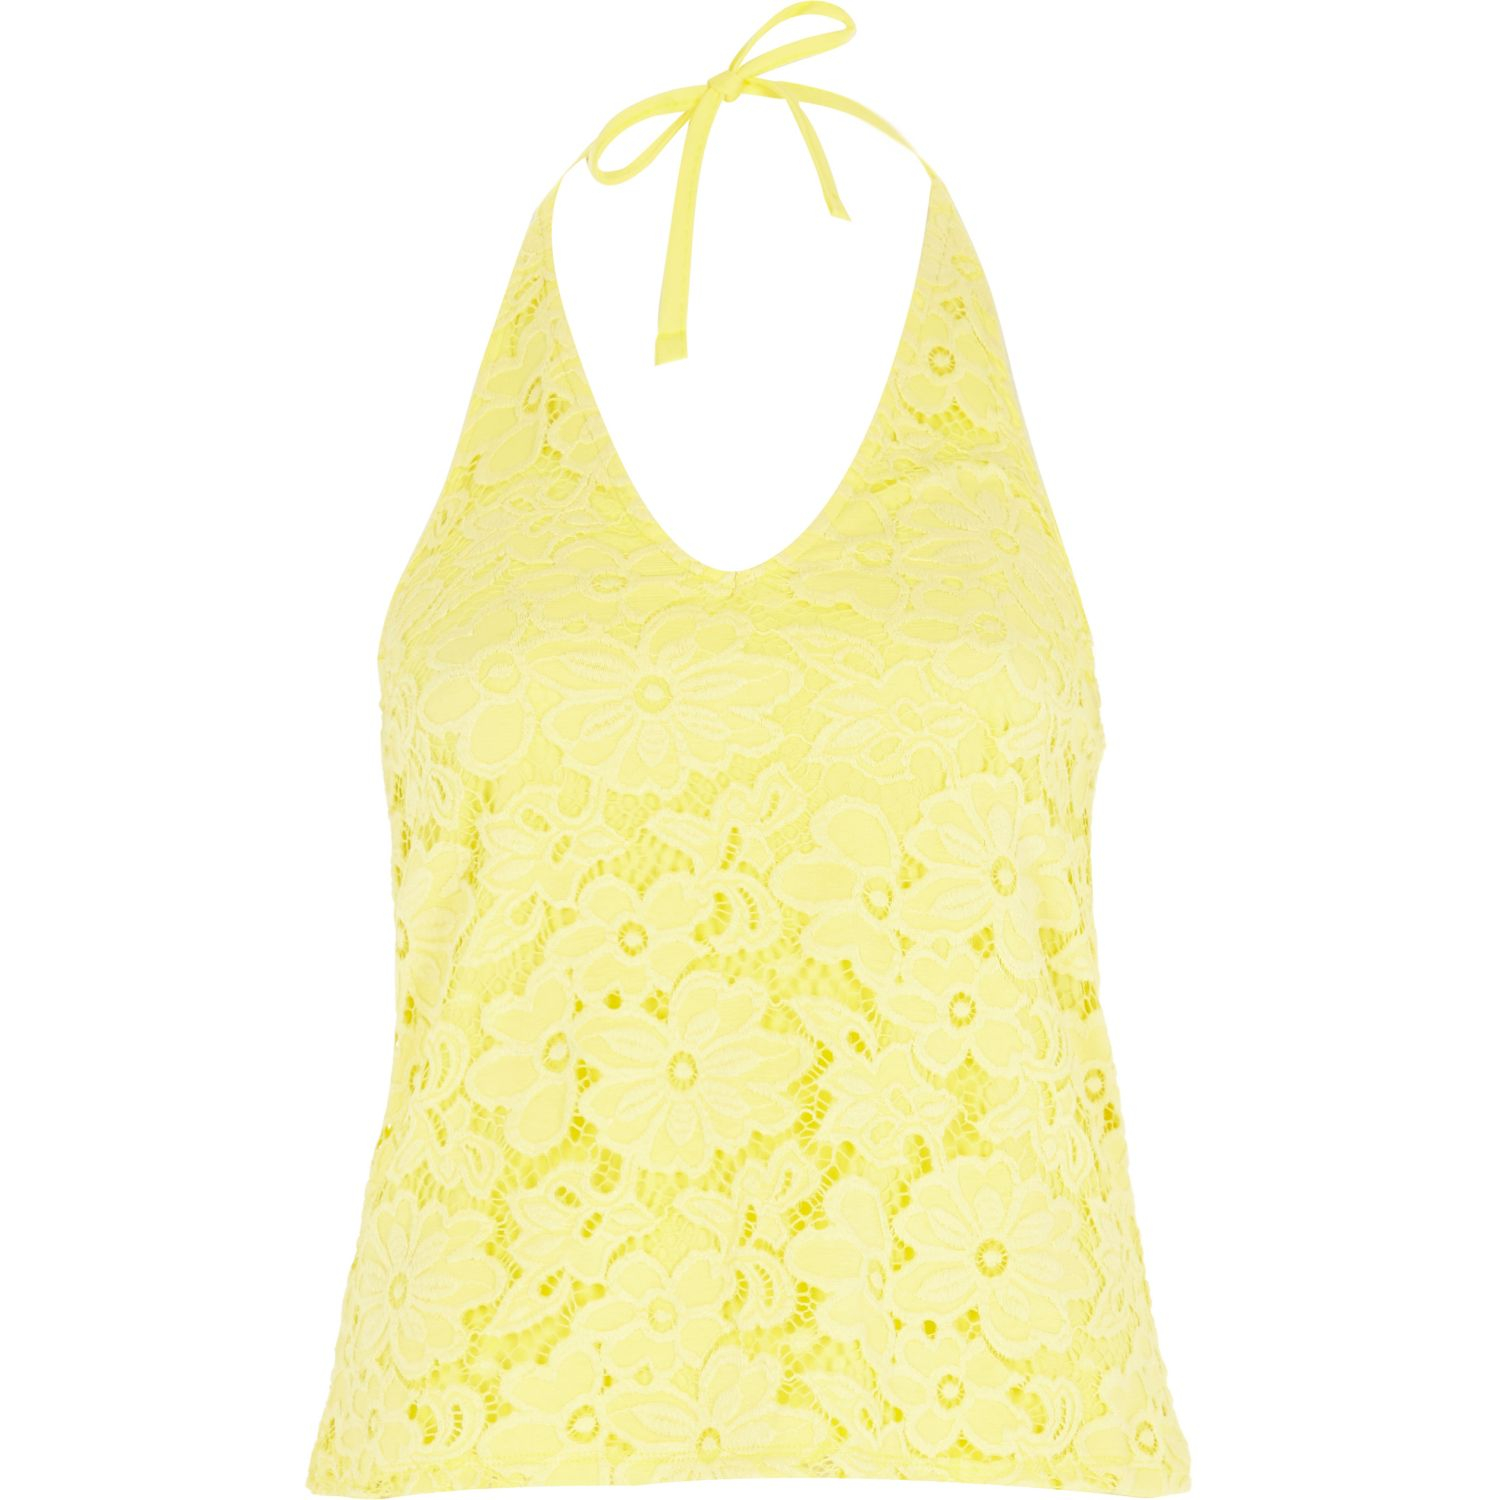 River Island Yellow Lace Halter Neck Top in Yellow - Lyst